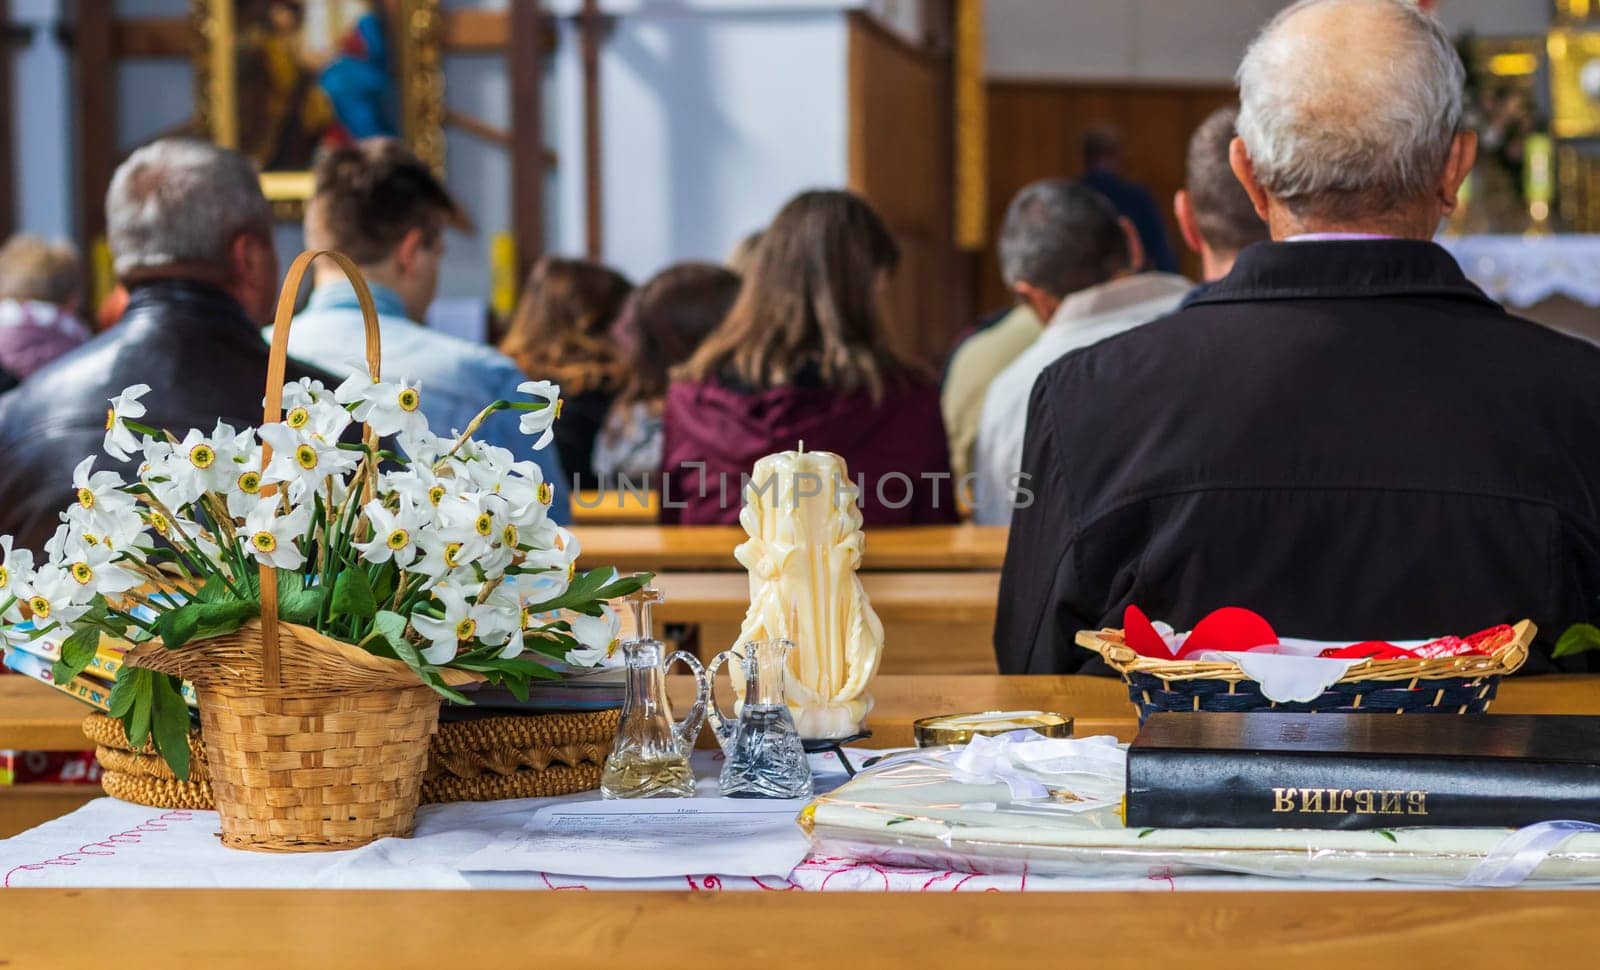 Shot of the people gathered for mass at Roman catholic church. Bible on the foreground